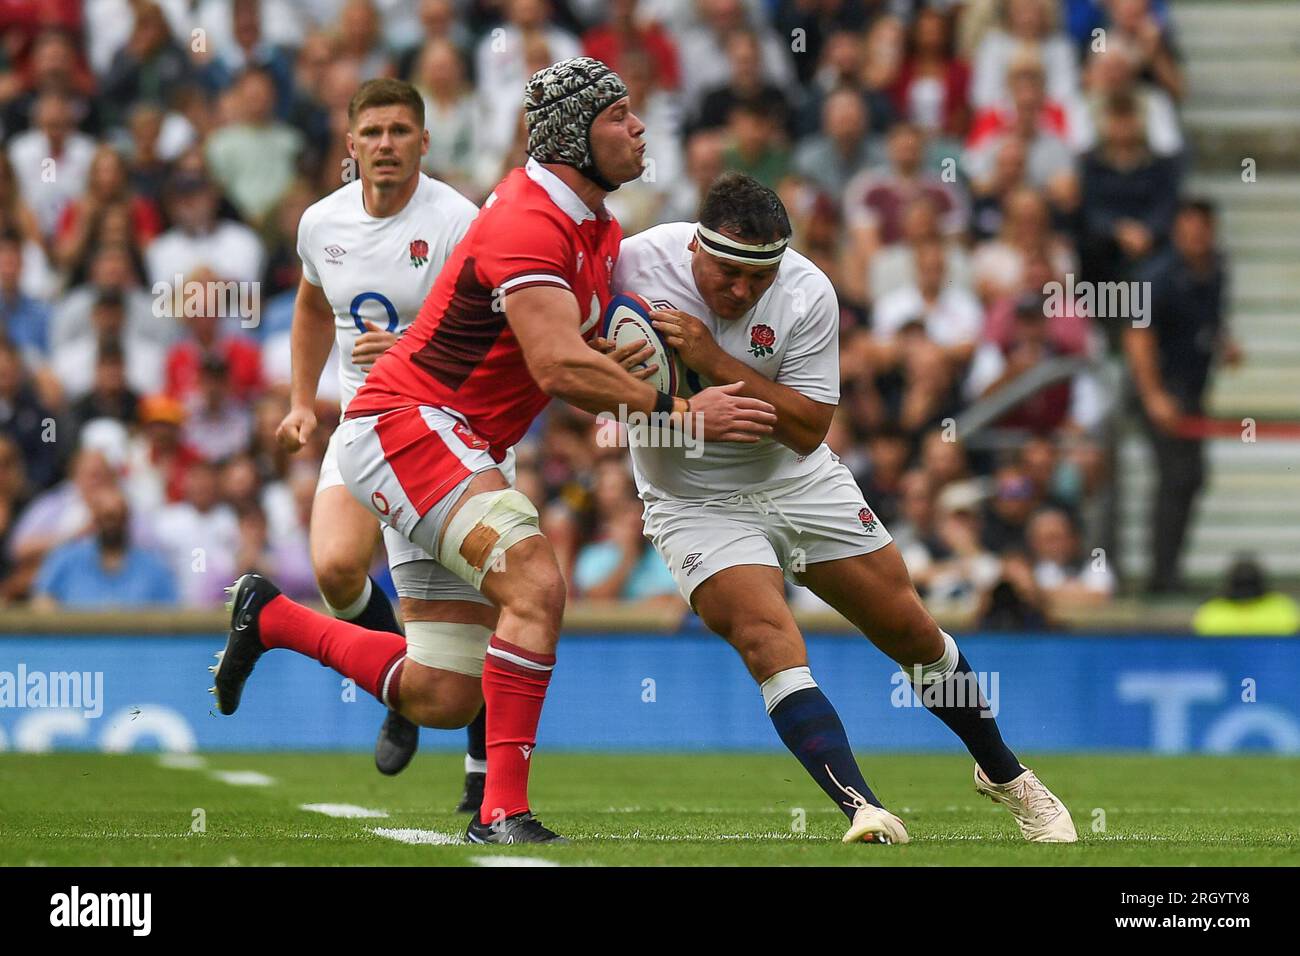 Jamie George of England is tackled by Dan Lydiate of Wales during the 2023 Summer Series match England vs Wales at Twickenham Stadium, Twickenham, United Kingdom, 12th August 2023 (Photo by Mike